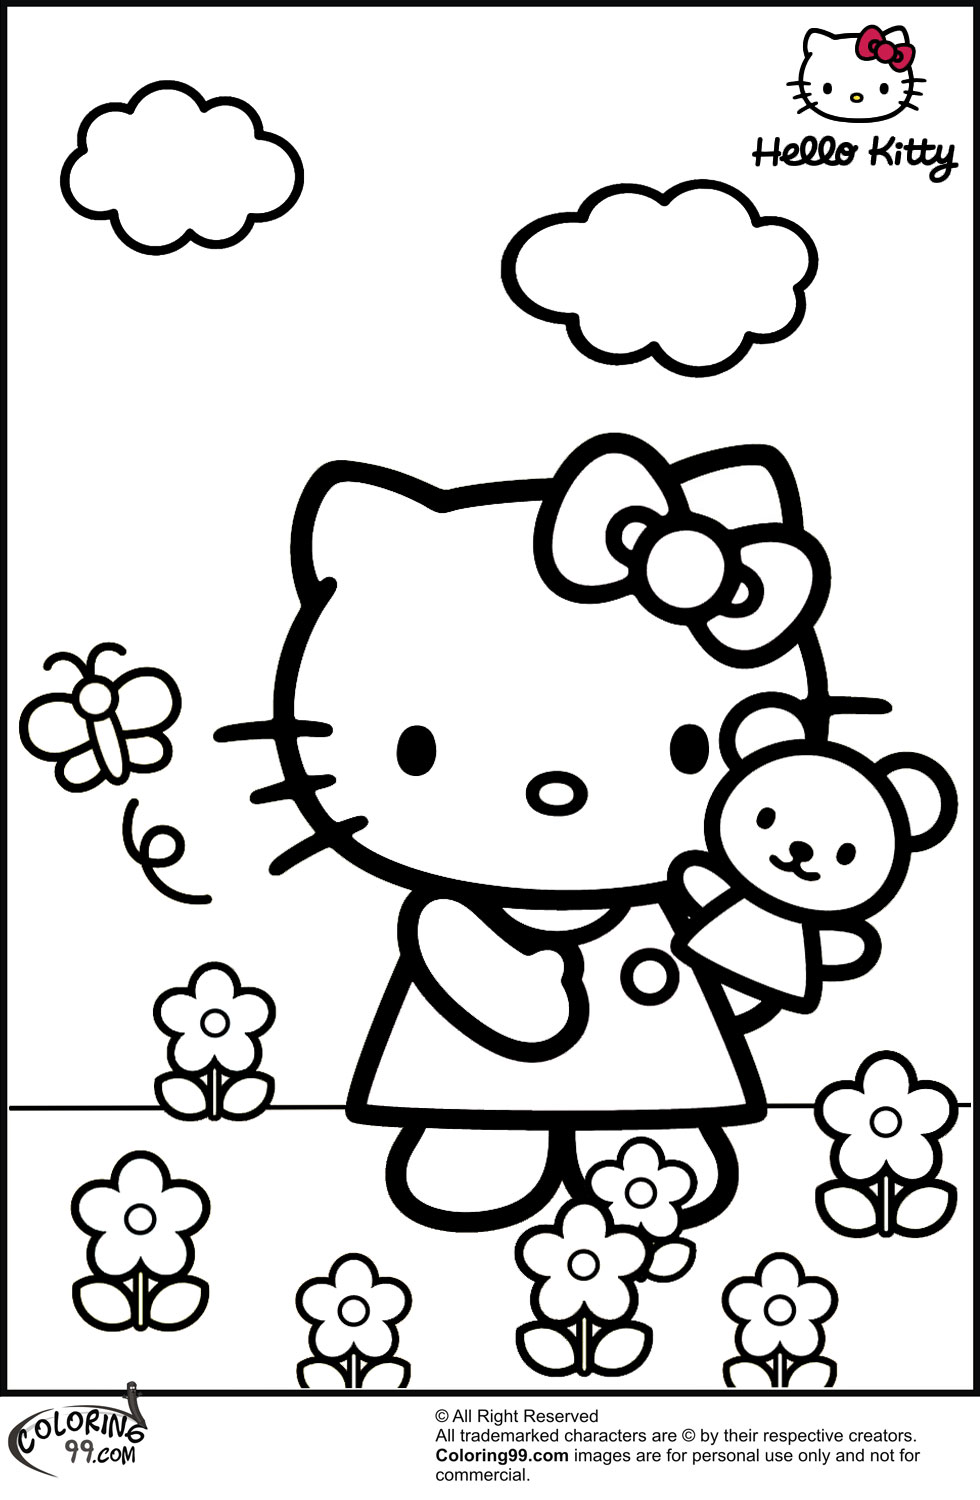 Download Hello Kitty Supercoloring Pages - 234+ Best Quality File for Cricut, Silhouette and Other Machine